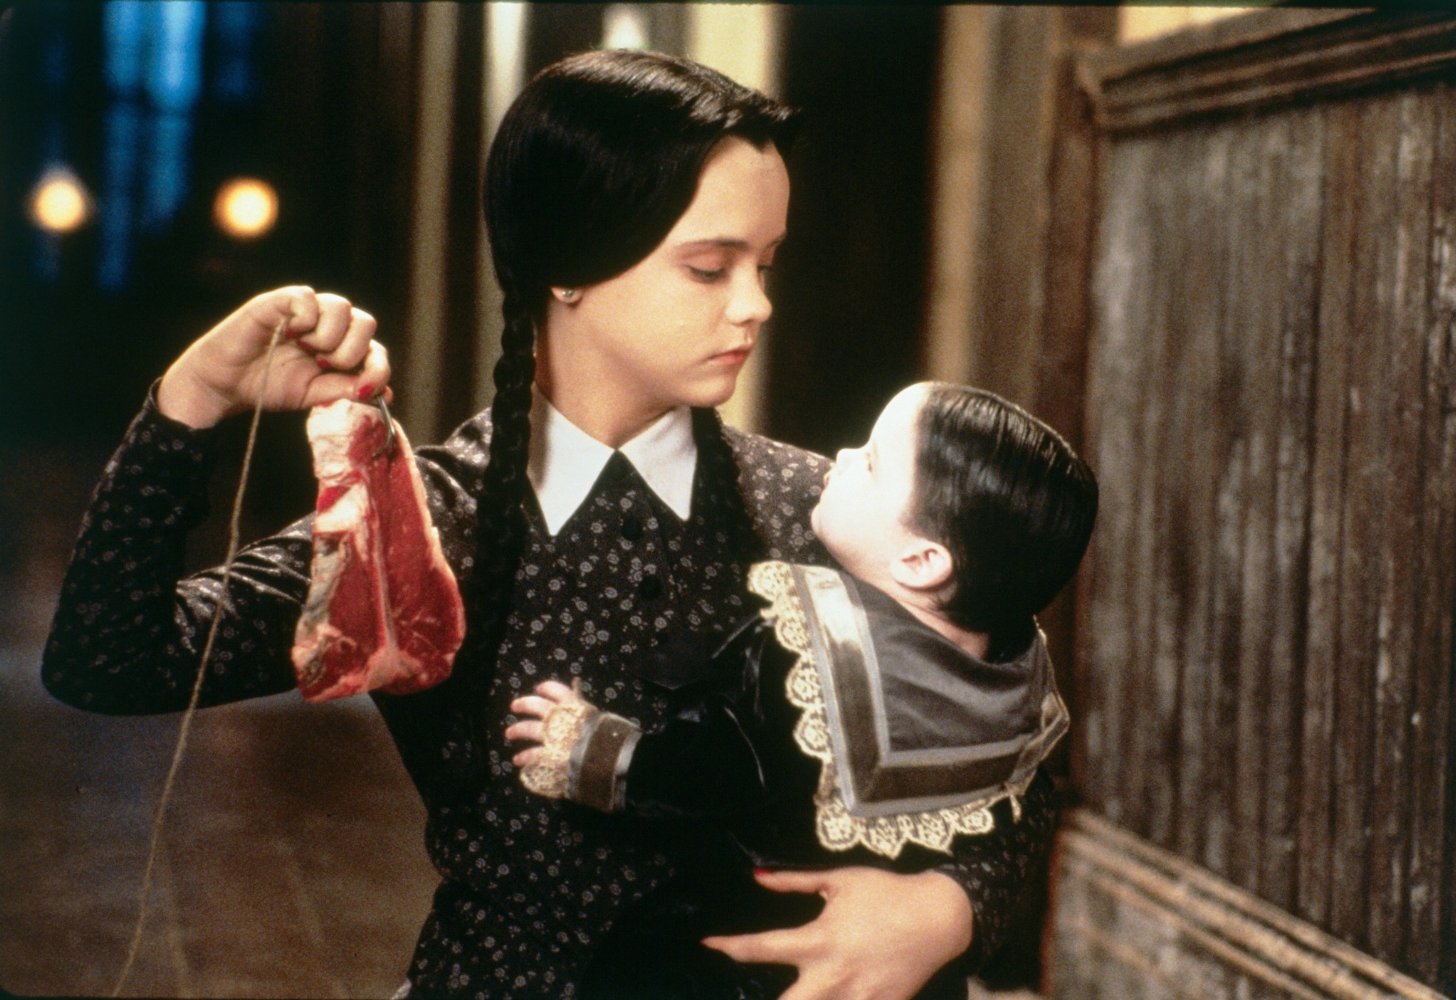 Wednesday Friday Addams character list movies (Addams Family Values